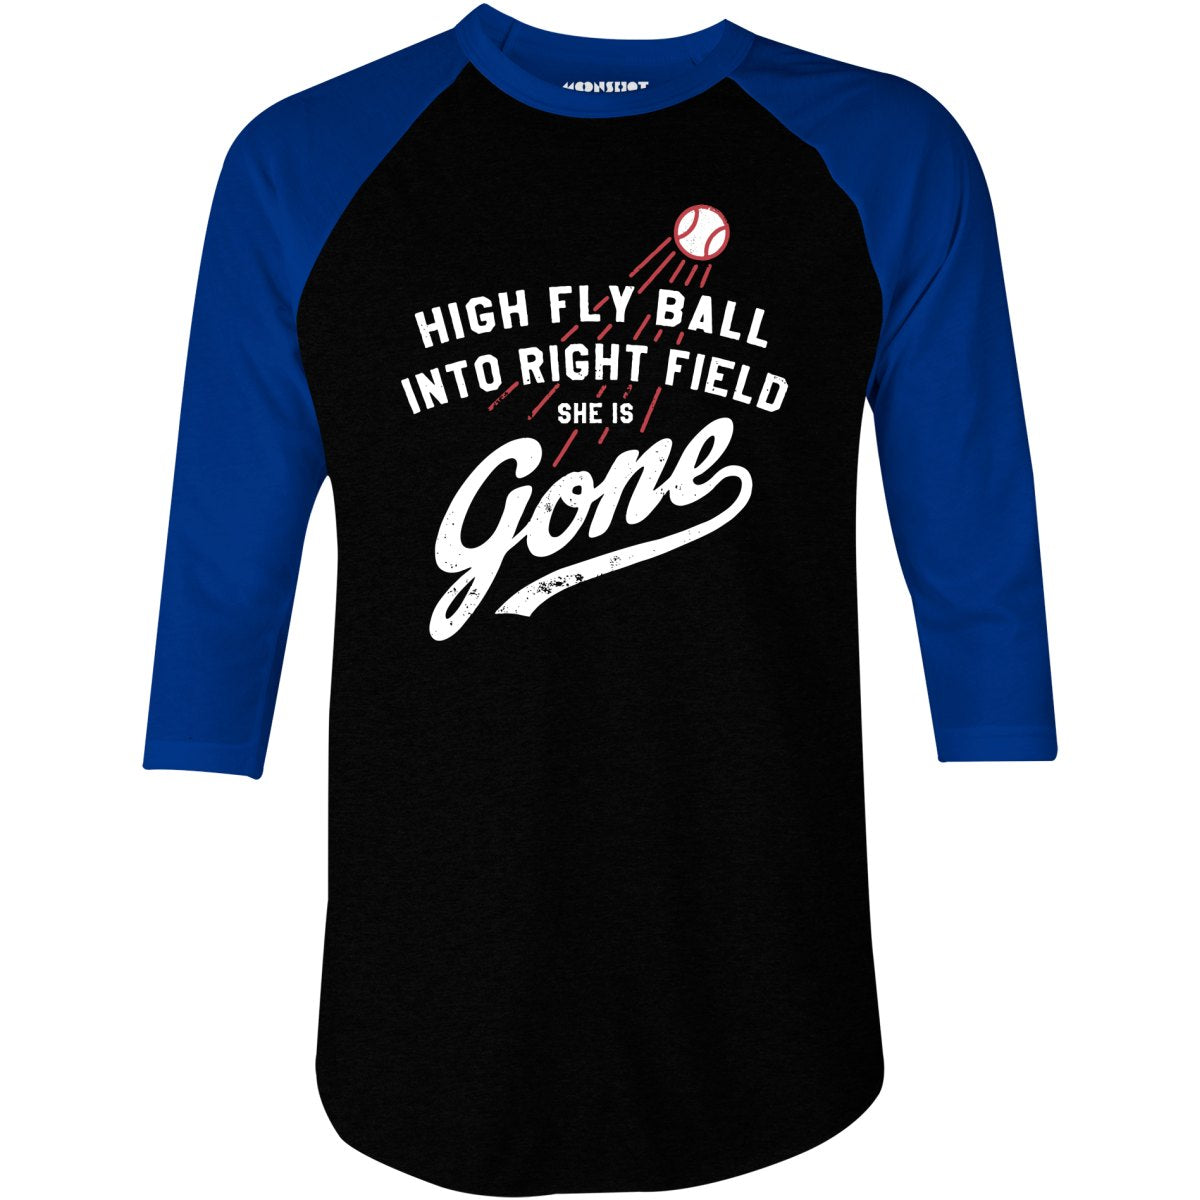 High Fly Ball Into Right Field She is Gone - 3/4 Sleeve Raglan T-Shirt